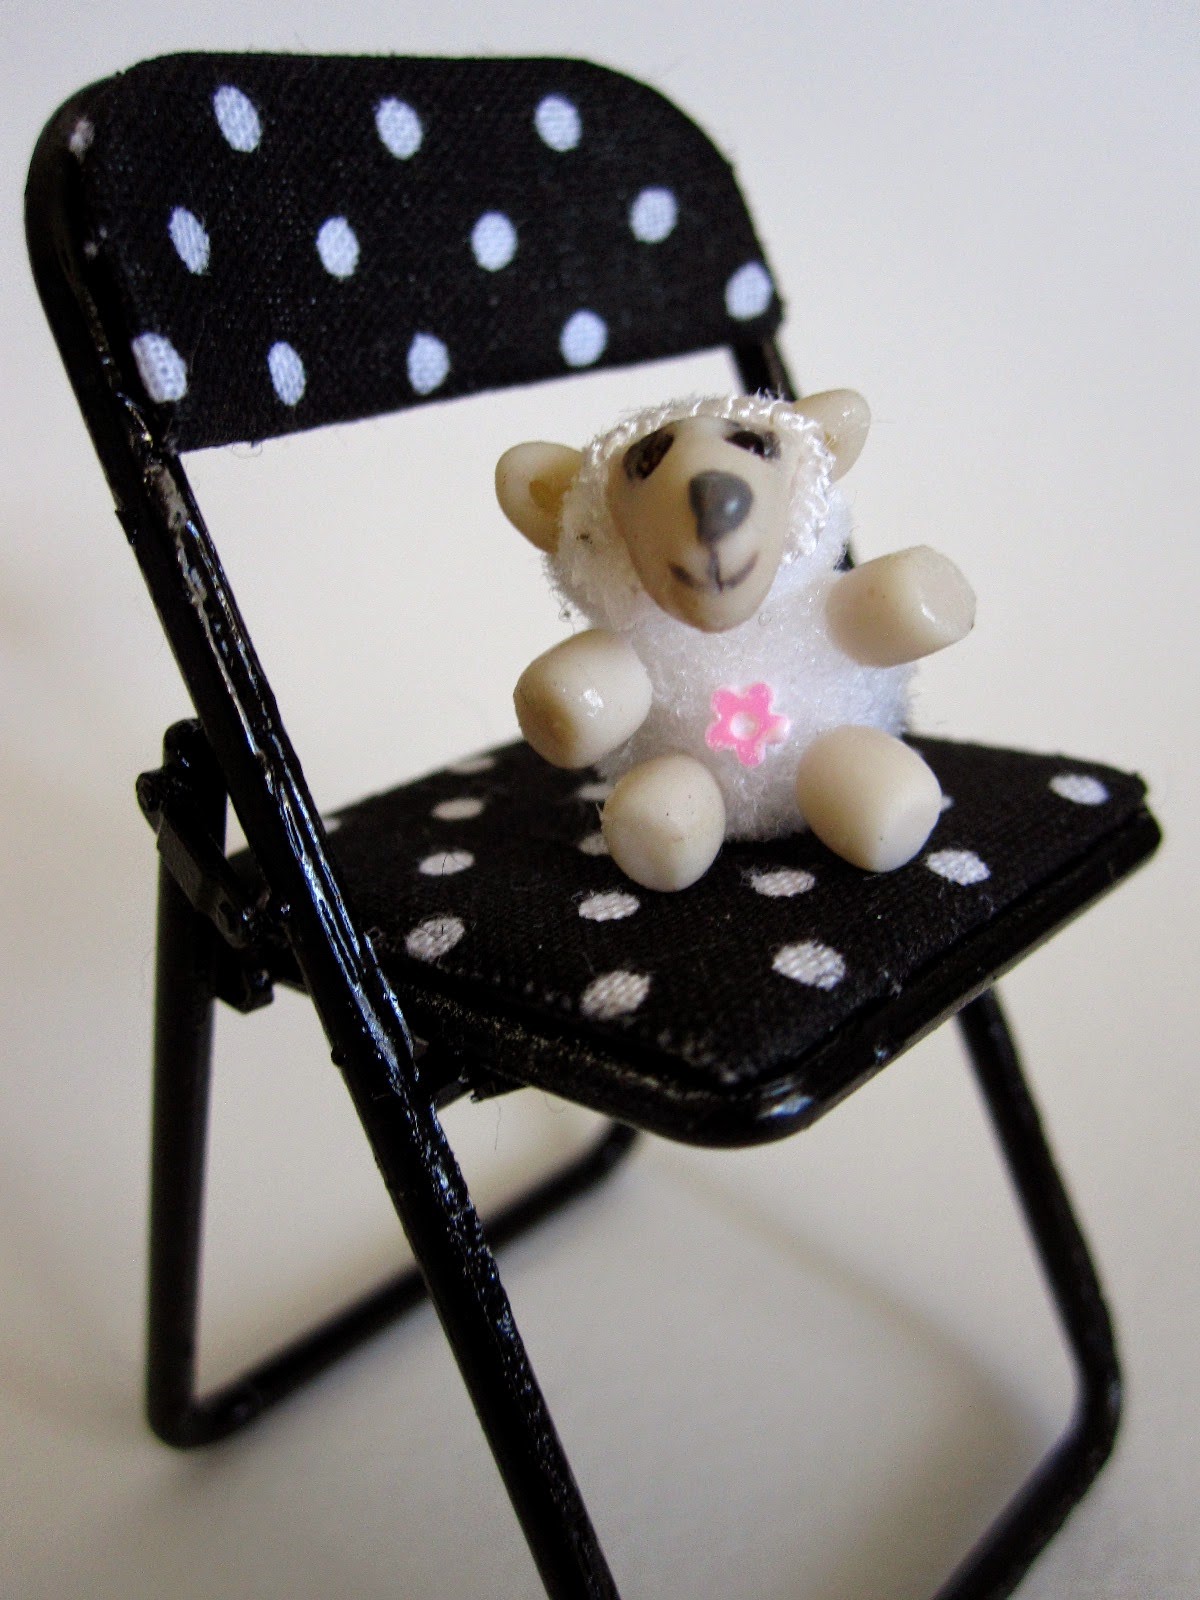 Modern dolls' house miniature stuffed toy sheep sitting on a miniature black and white spotted folding chair.